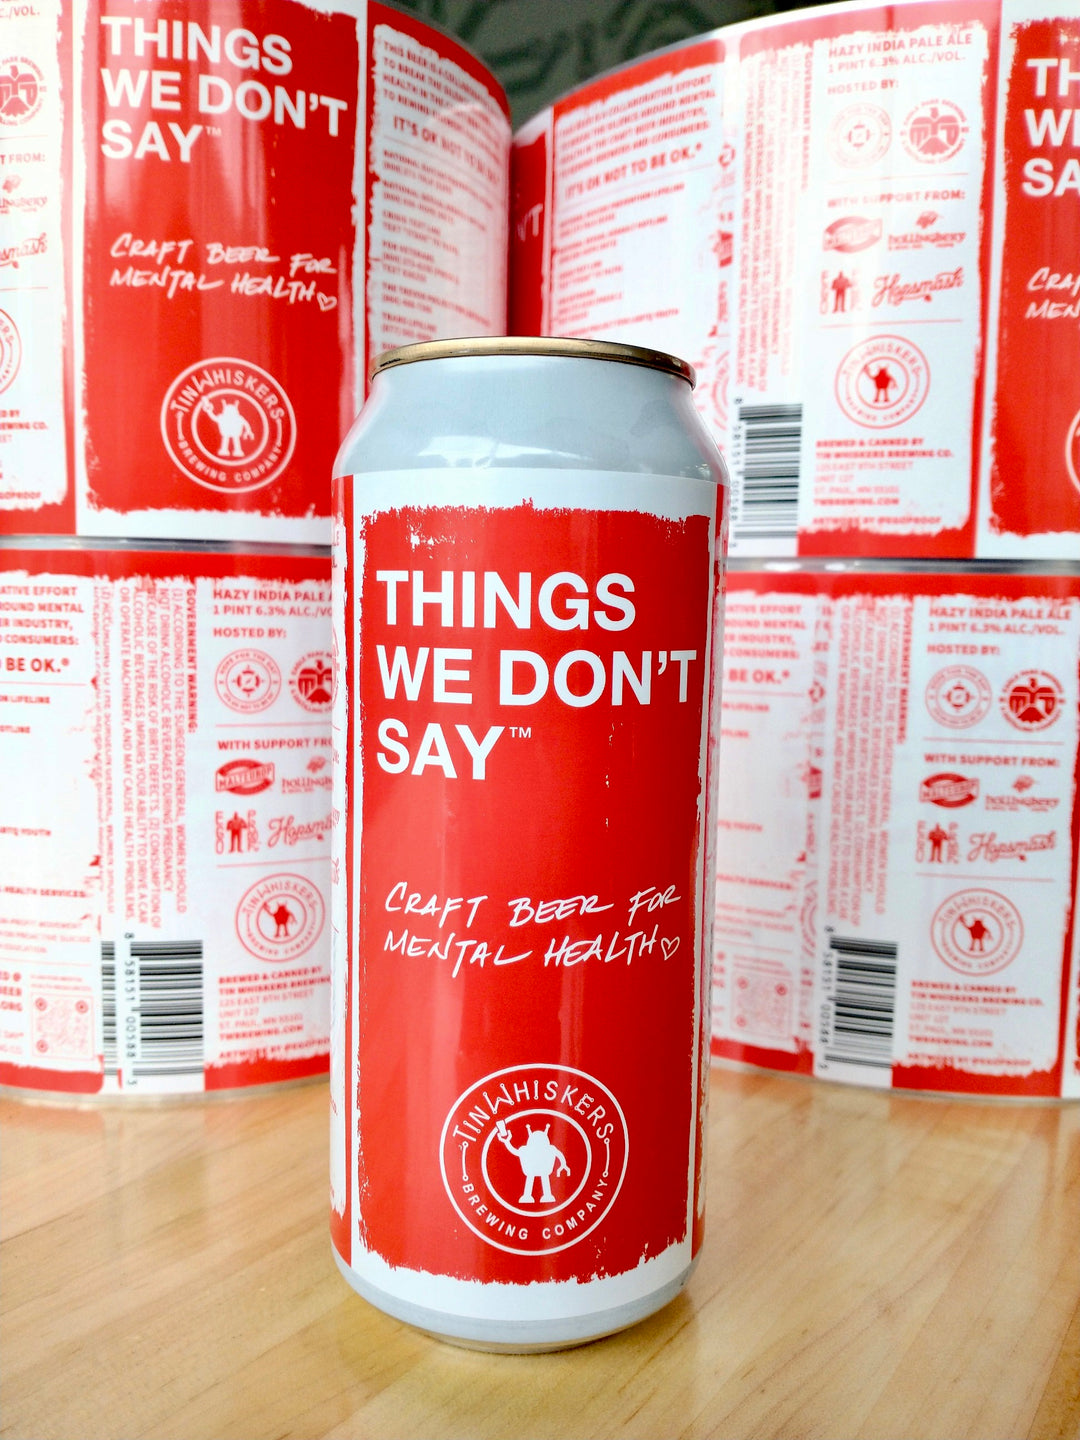 Things We Don't Say: Craft Beer For Mental Health